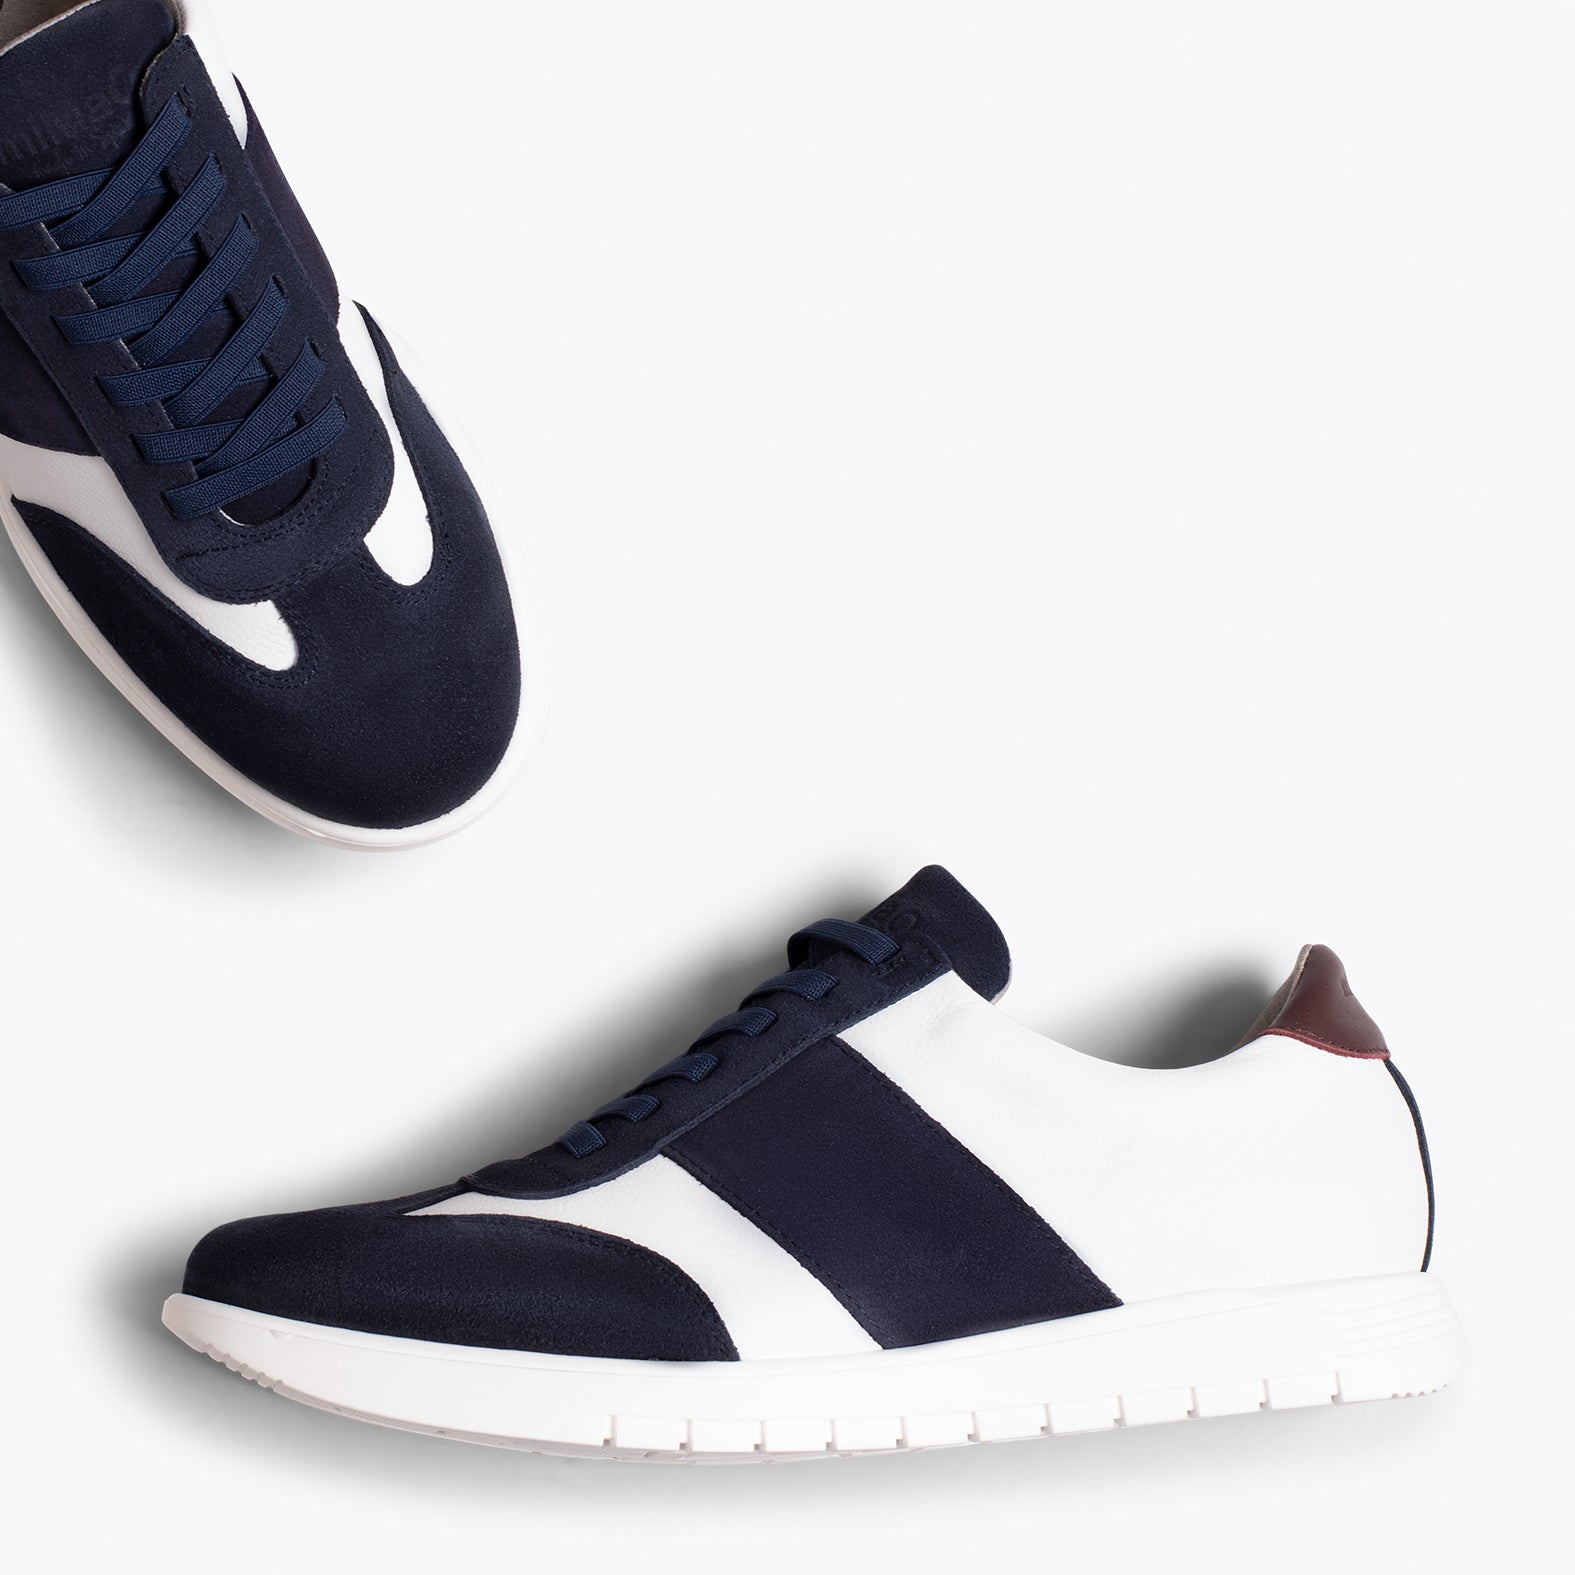 SPORT  - WHITE AND NAVY mixed leather sneaker for men